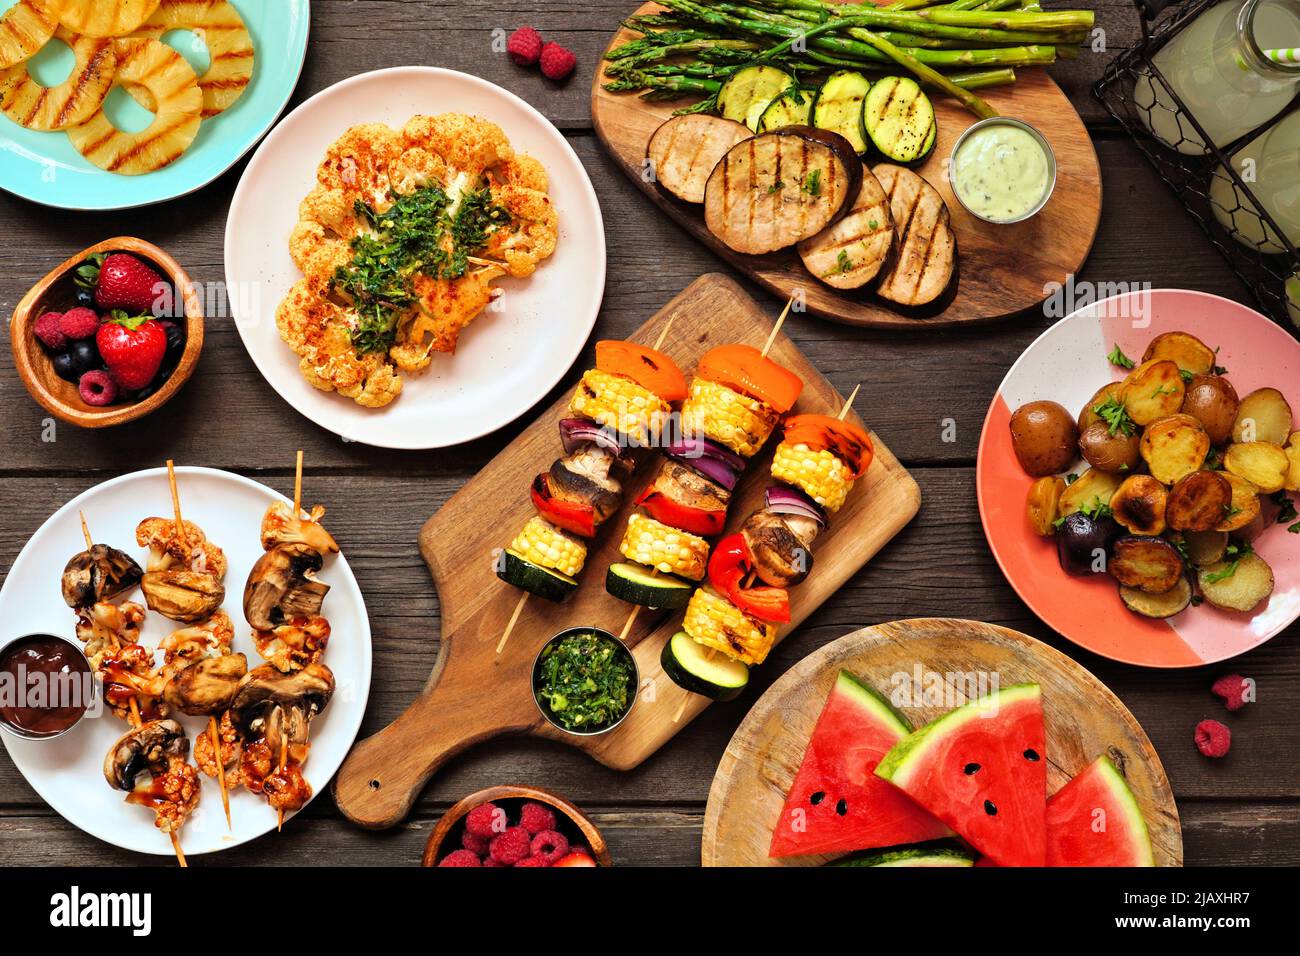 Healthy plant based summer bbq table scene. Top view on a dark wood background. Grilled fruit and vegetables, skewers, cauliflower steak and vegetaria Stock Photo